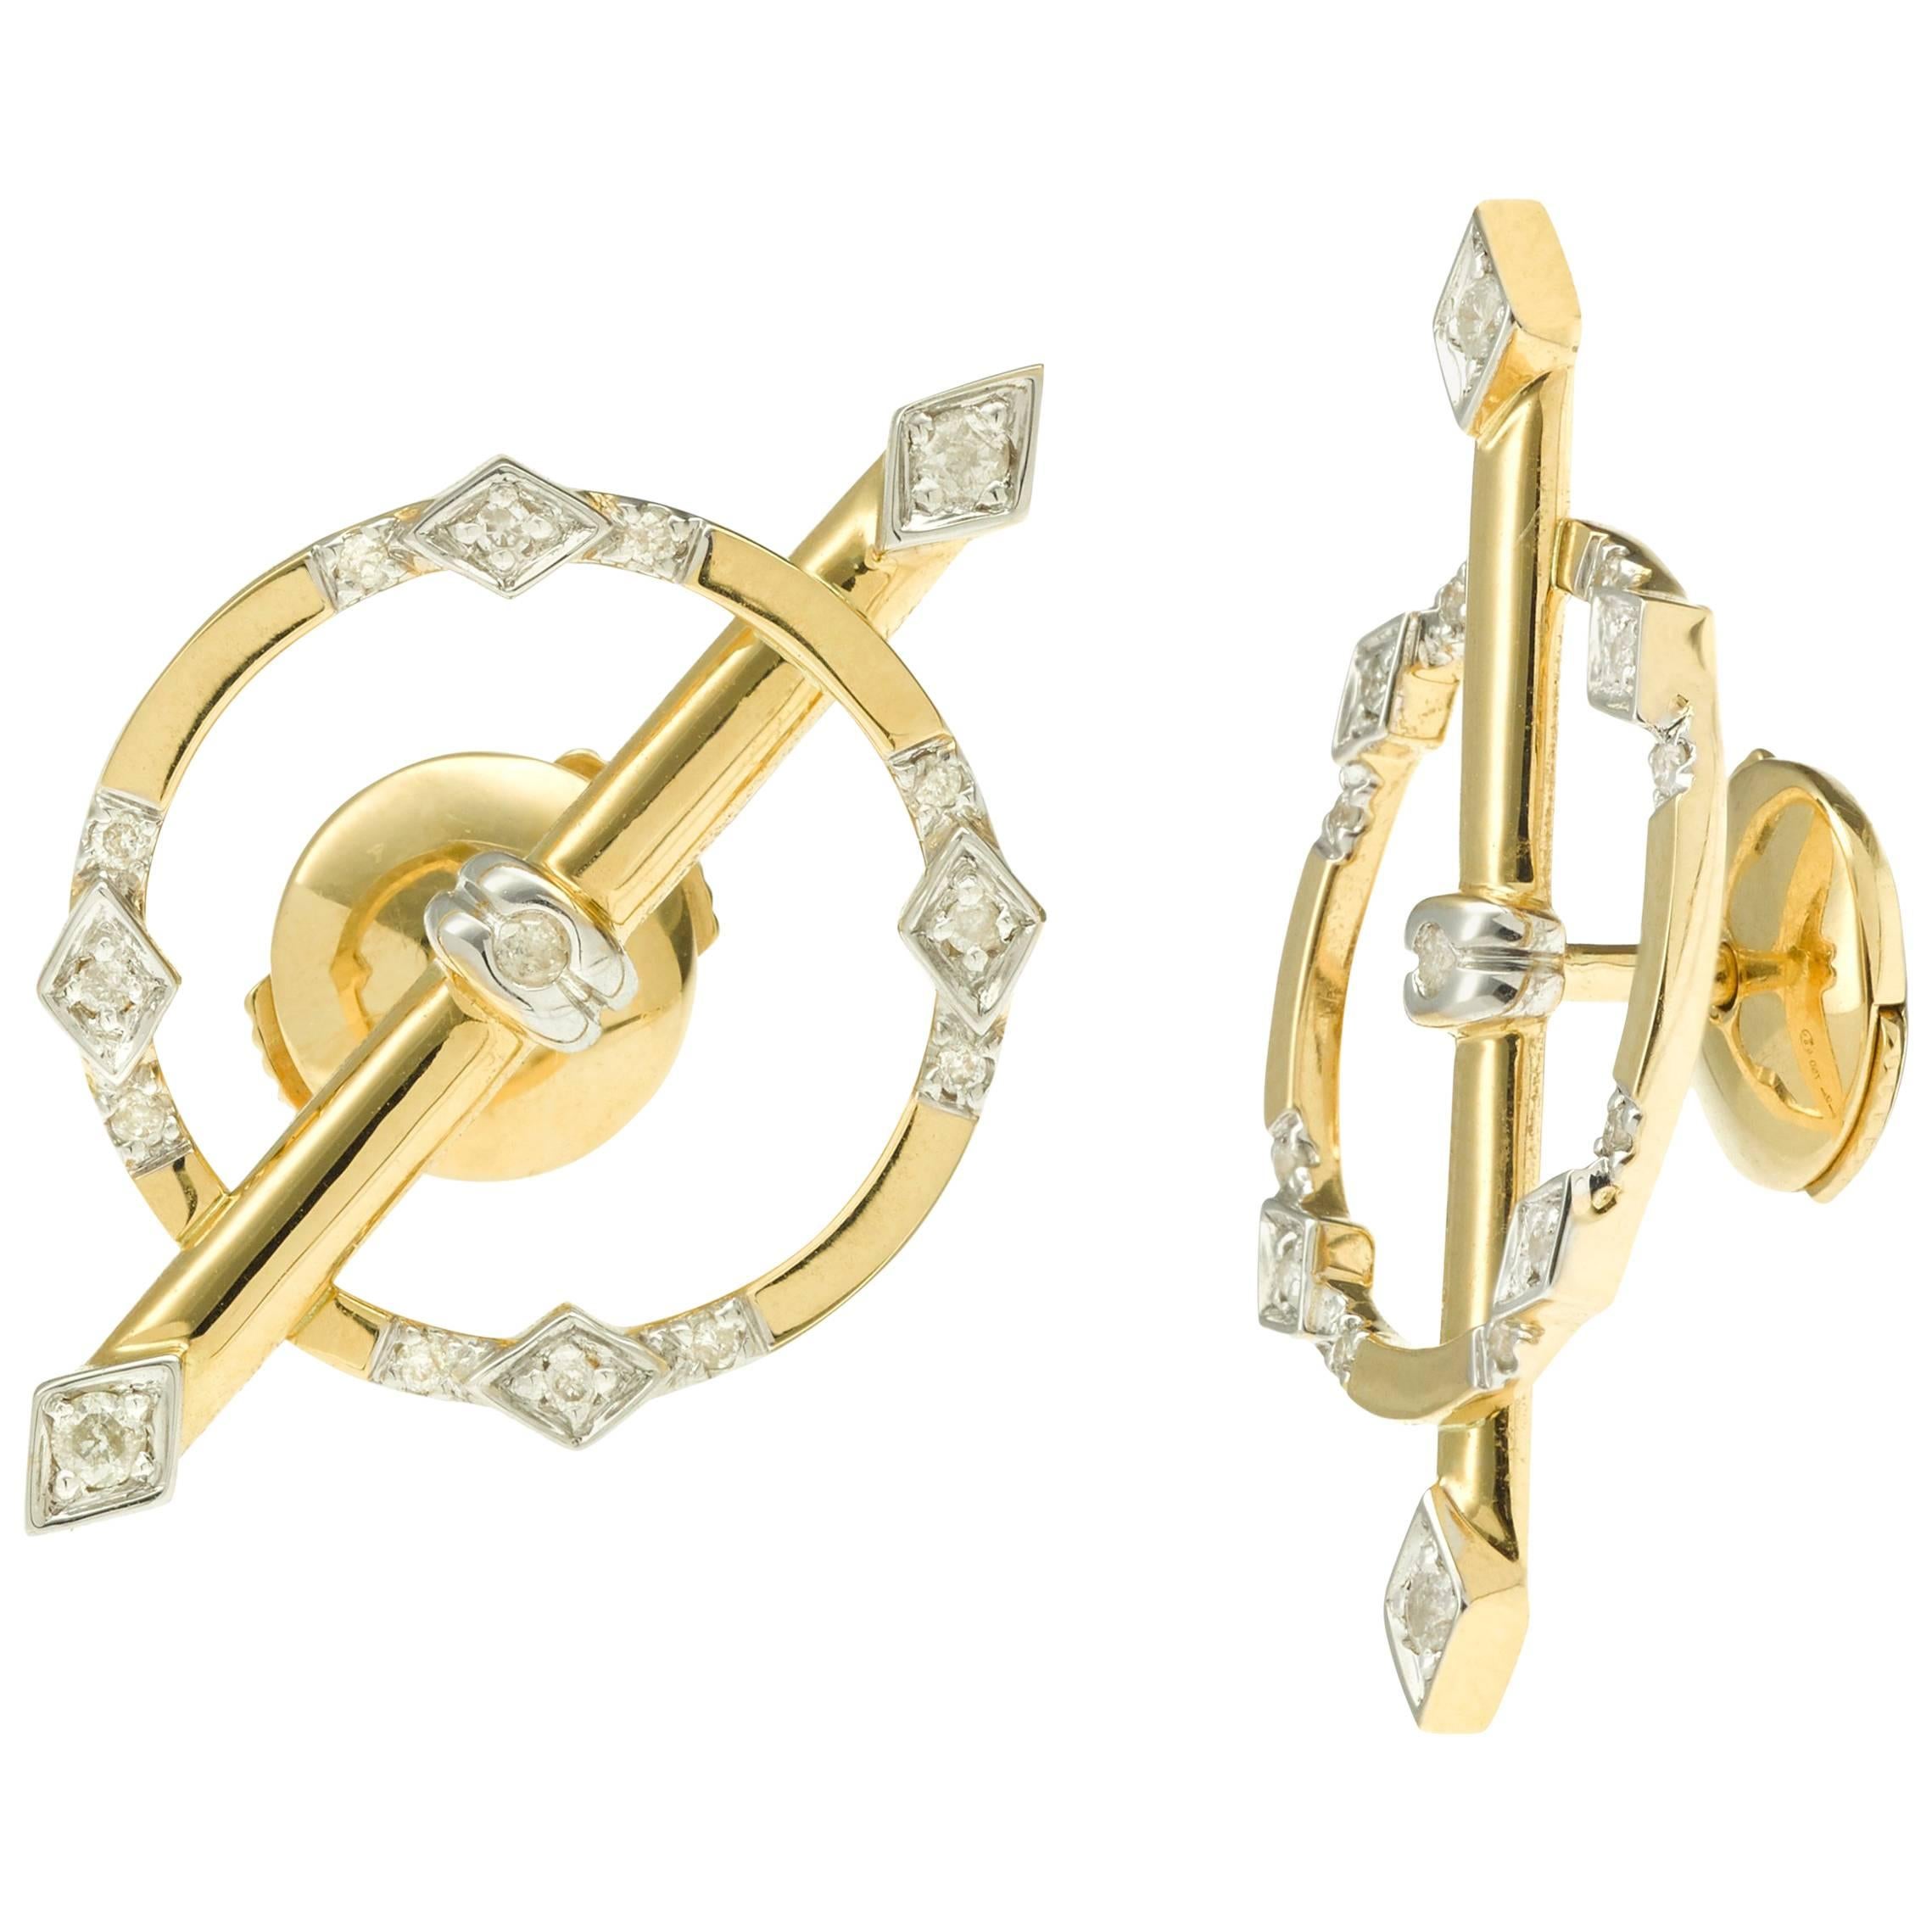 Yvonne Leon's Earring in 18 Karat Gold Yellow Gold and Diamonds